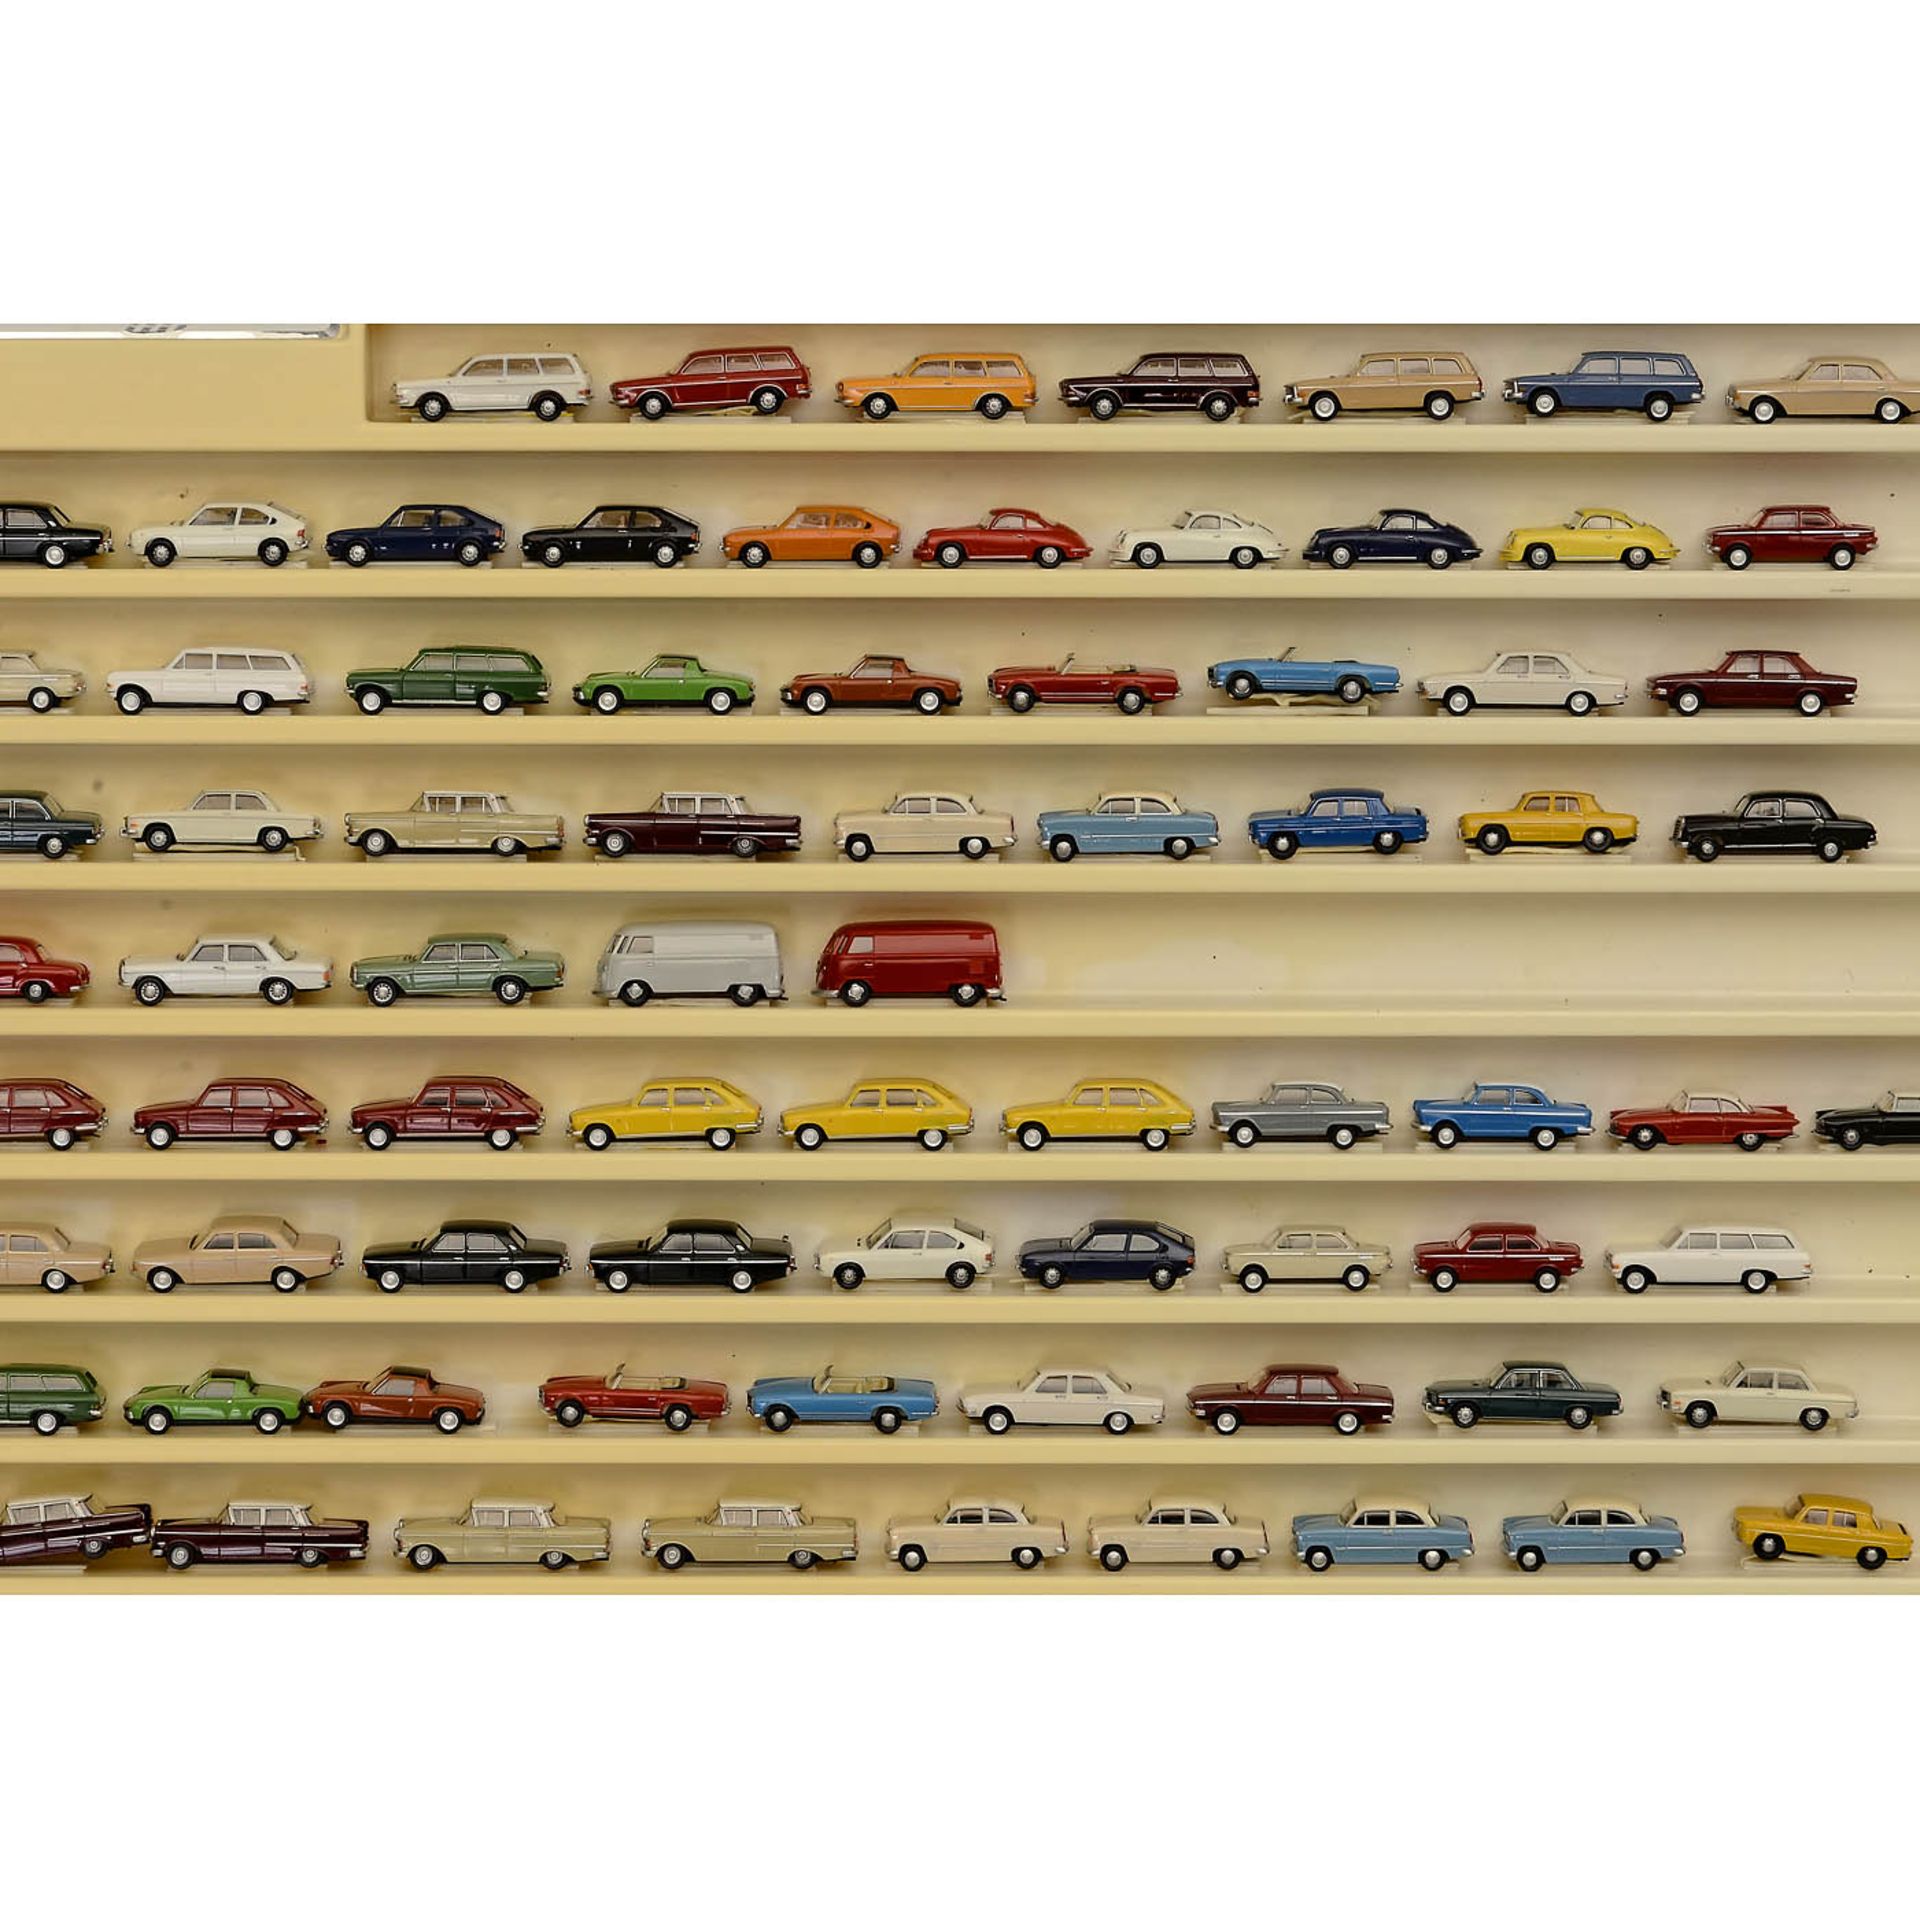 Large Collection of 1:87 Scale Model Cars - Image 4 of 9